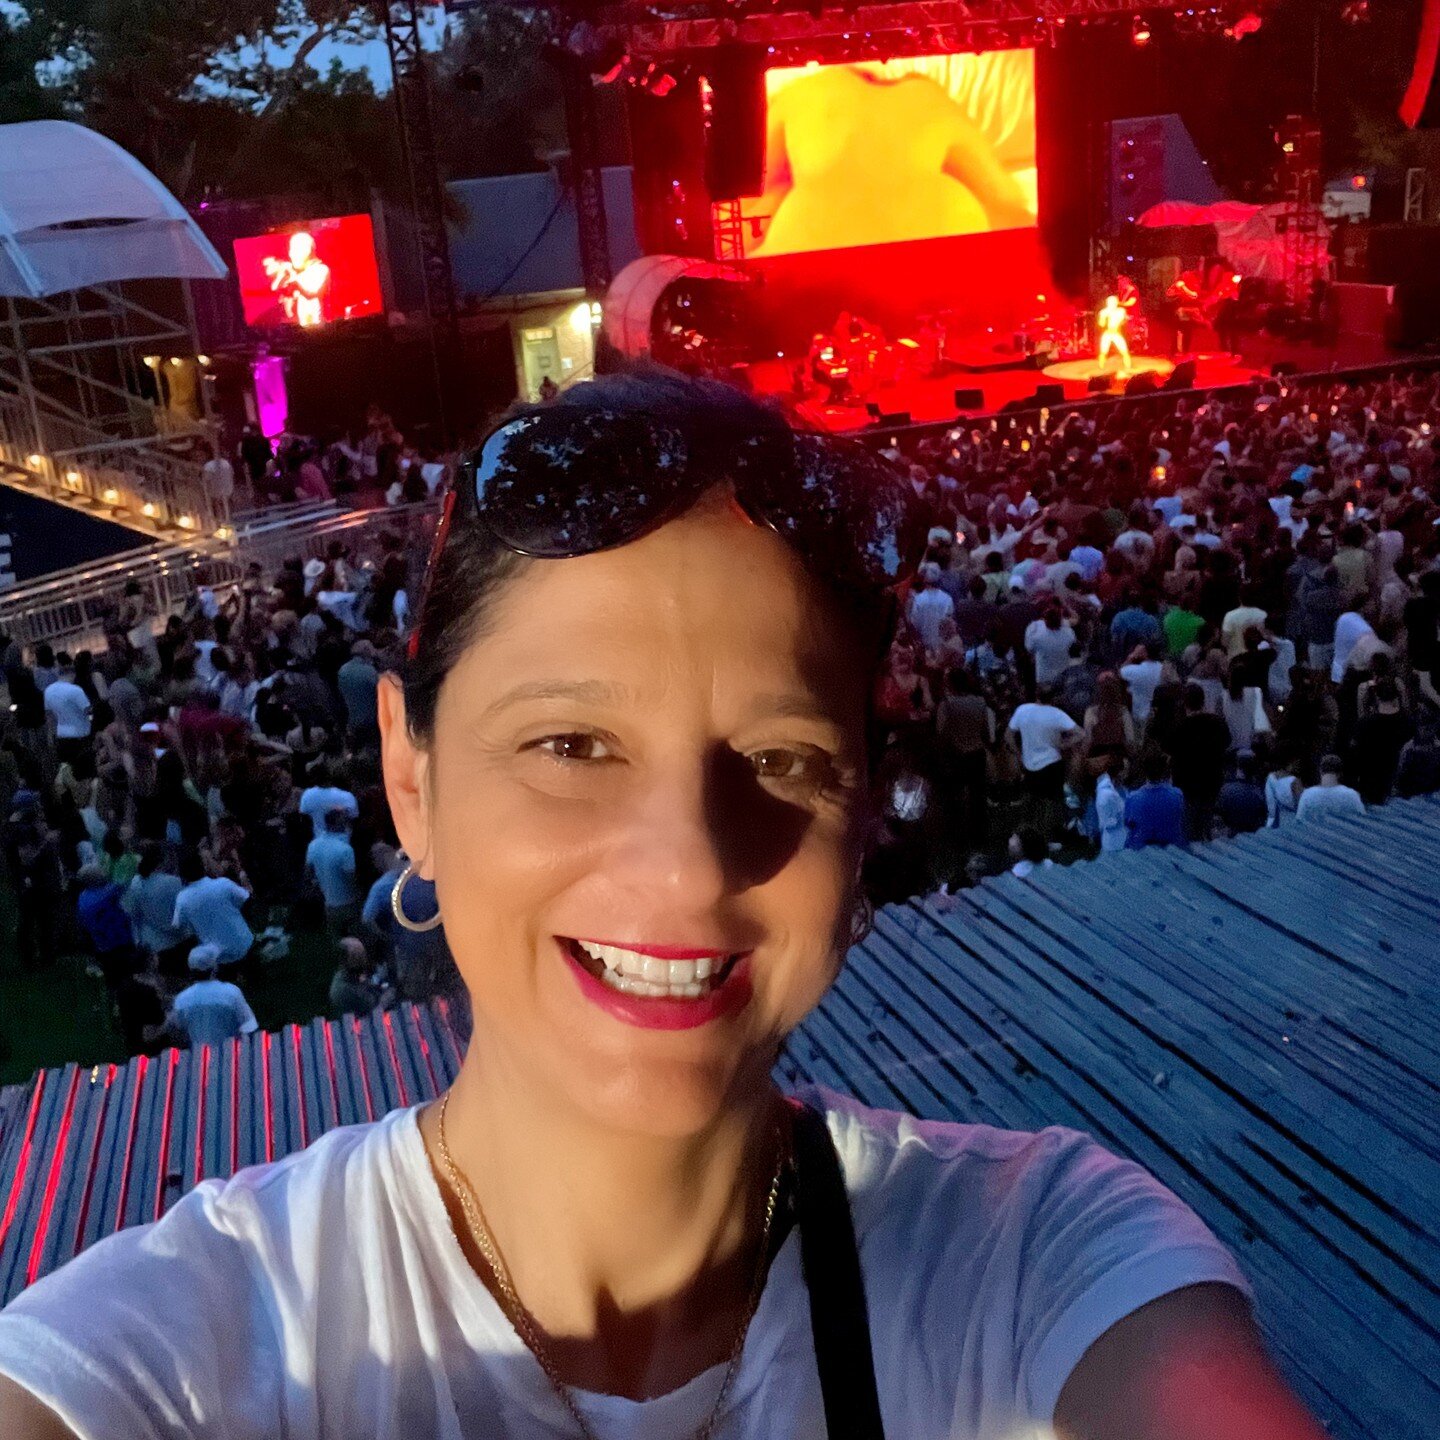 Here is Brazilian singer Ney Matogrosso killing it in Central park Sunday evening. 🎶🎤
He wiggled around stage sporting a golden costume, proving to everyone that age is just a number. Yeah, he&rsquo;s 80, folks. 🪘🕺

Ney is one of the most respect